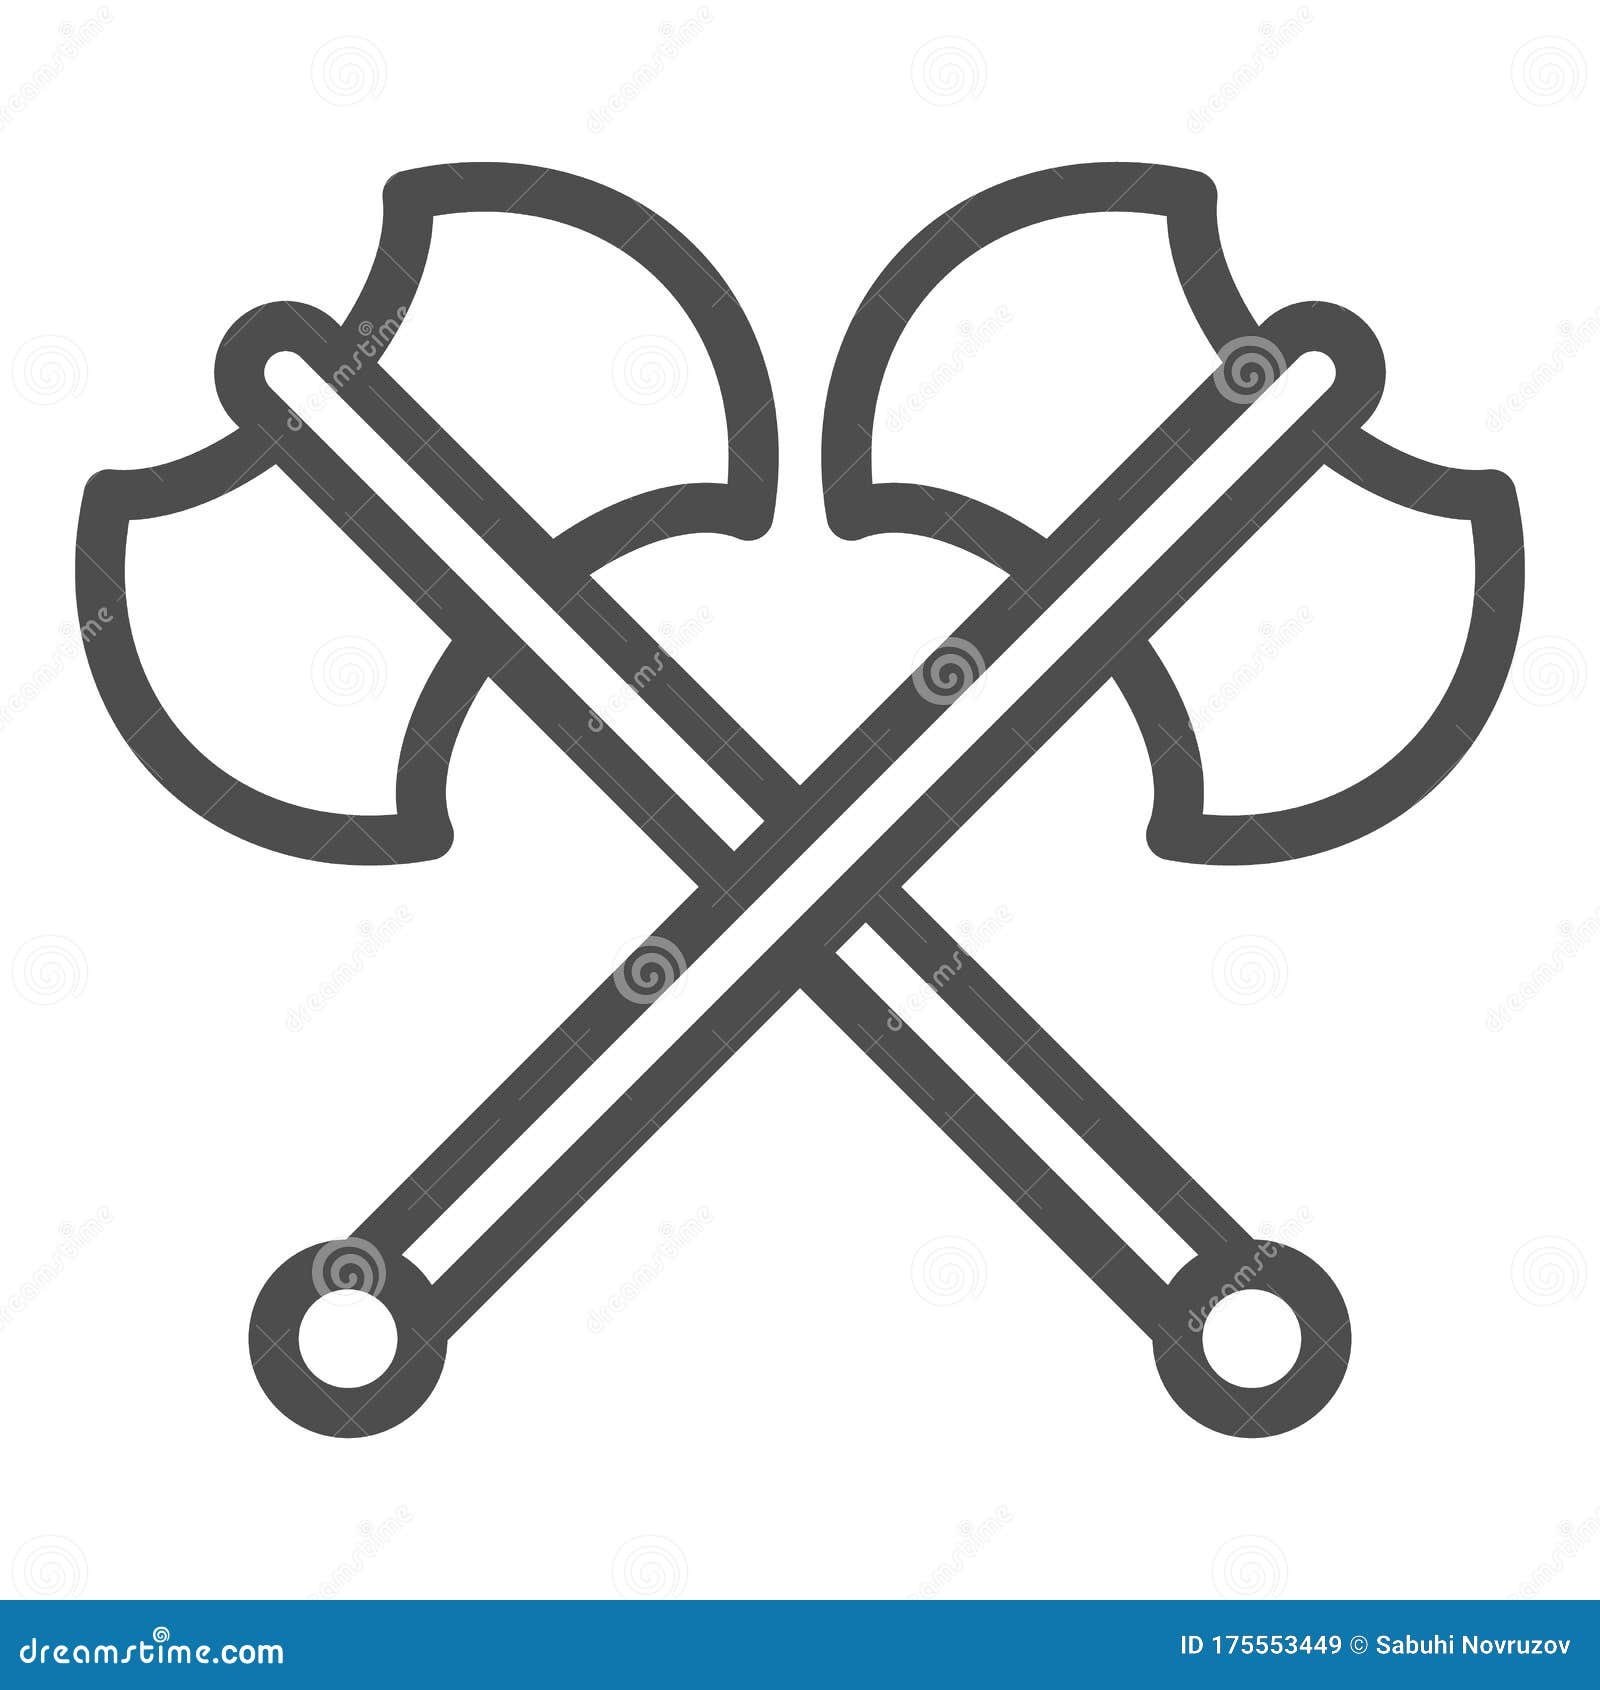 Double Axe Stock Illustrations 363 Double Axe Stock Illustrations Vectors Clipart Dreamstime